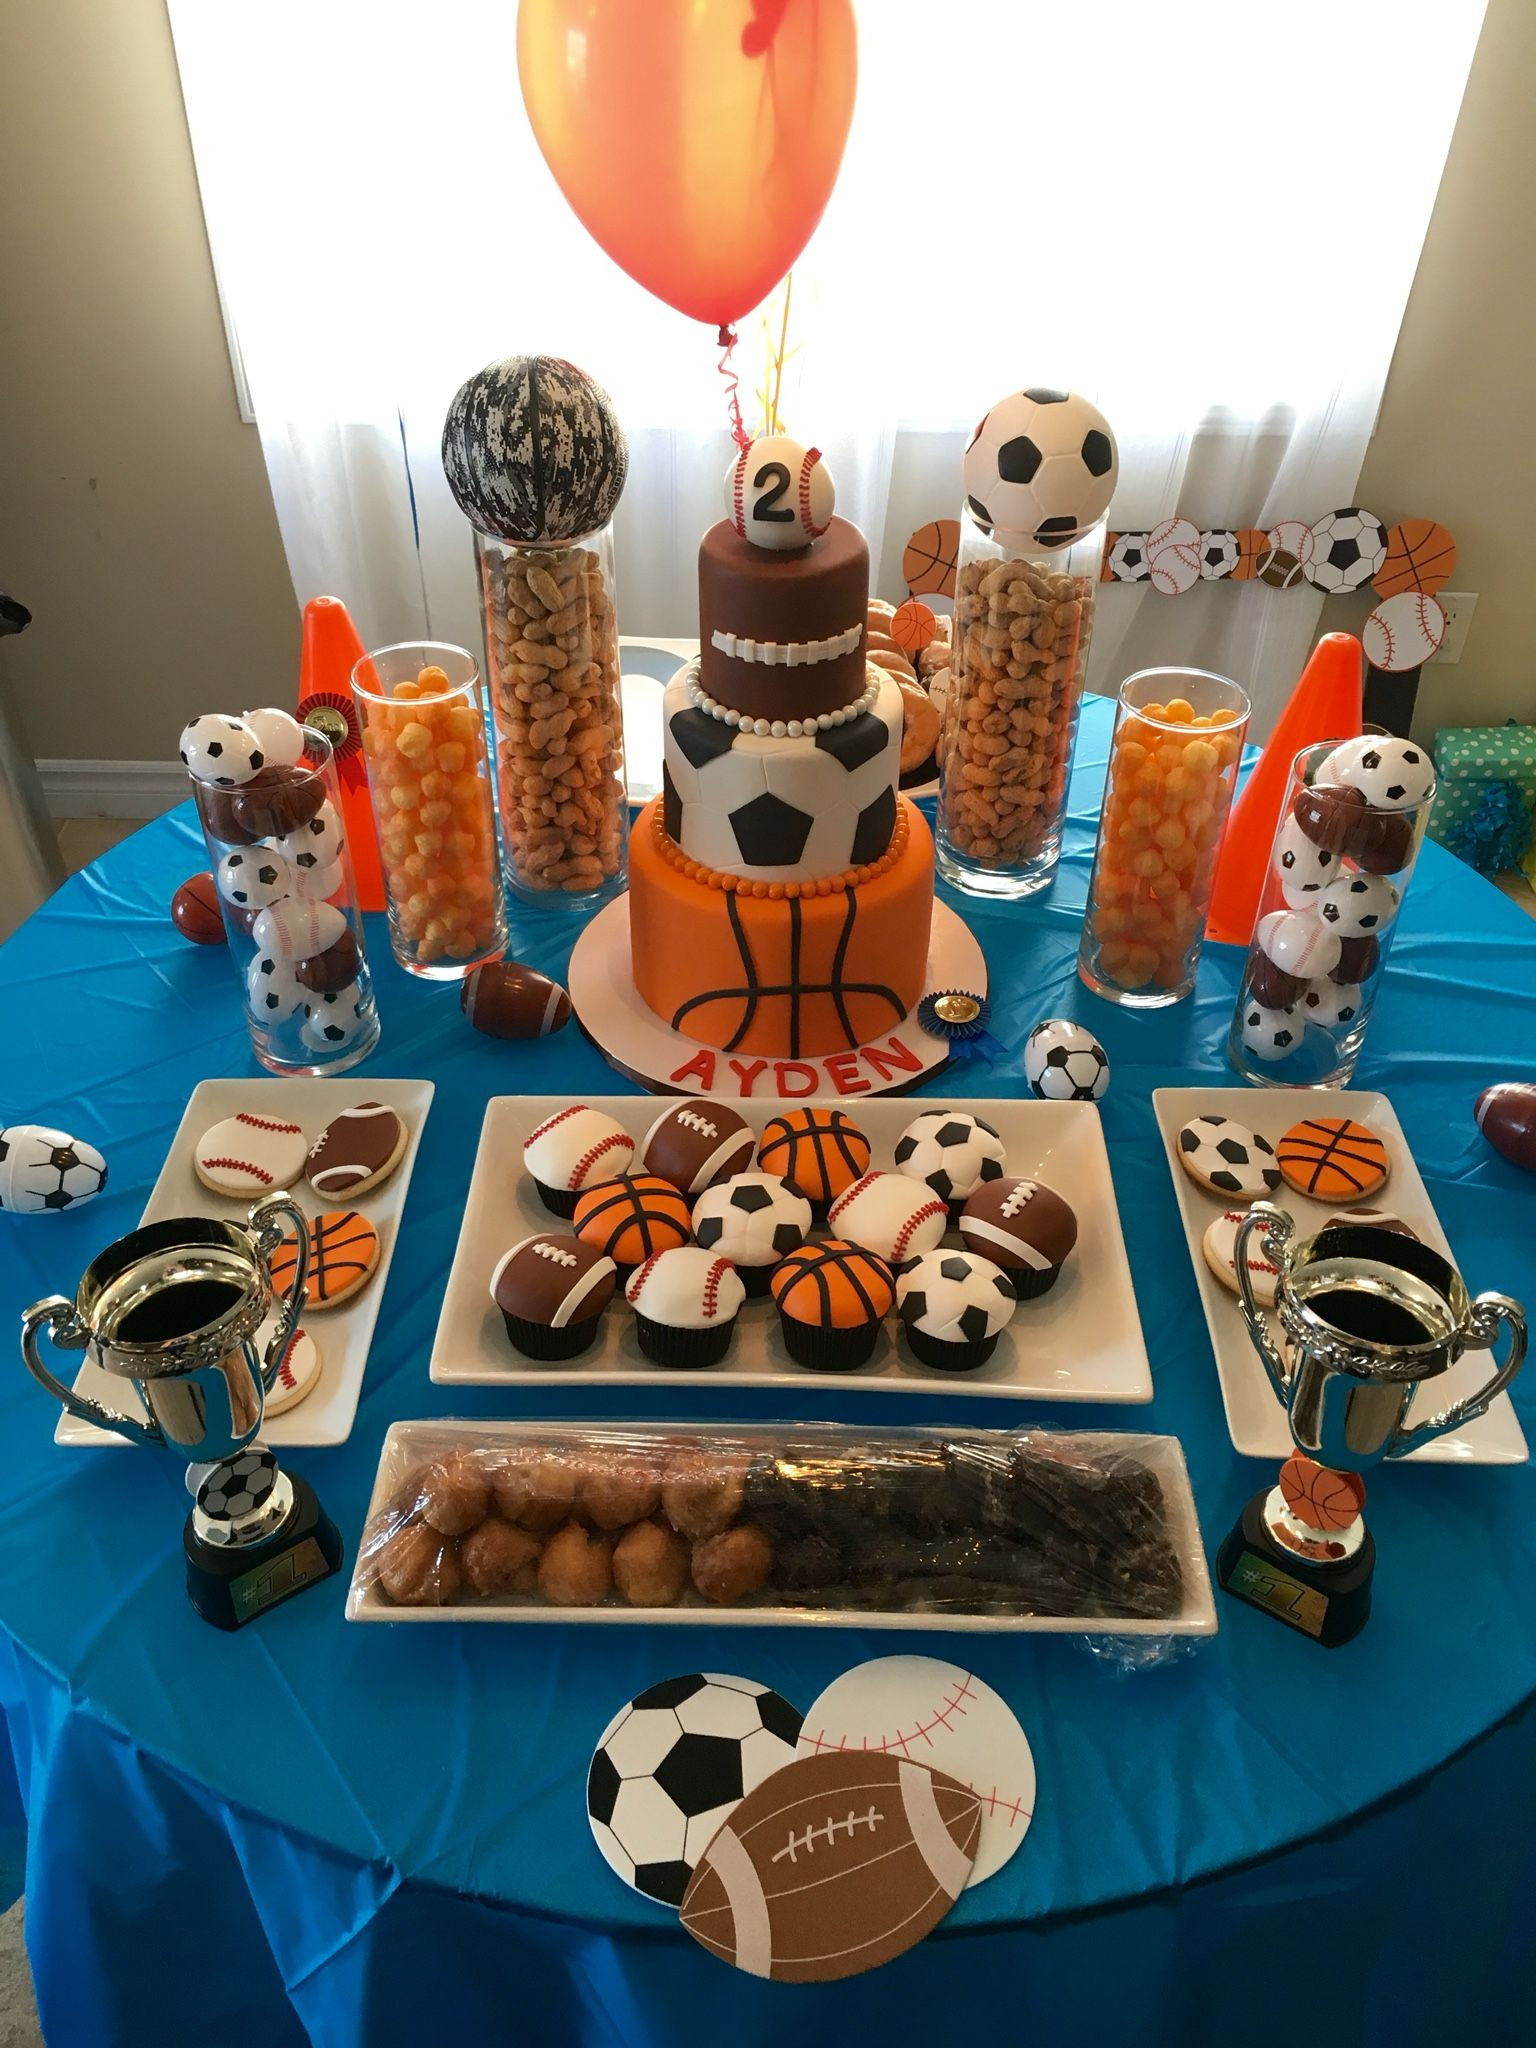 Sports Birthday Party Ideas
 Sports Birthday Theme Dessert Table for Ayden s 2nd